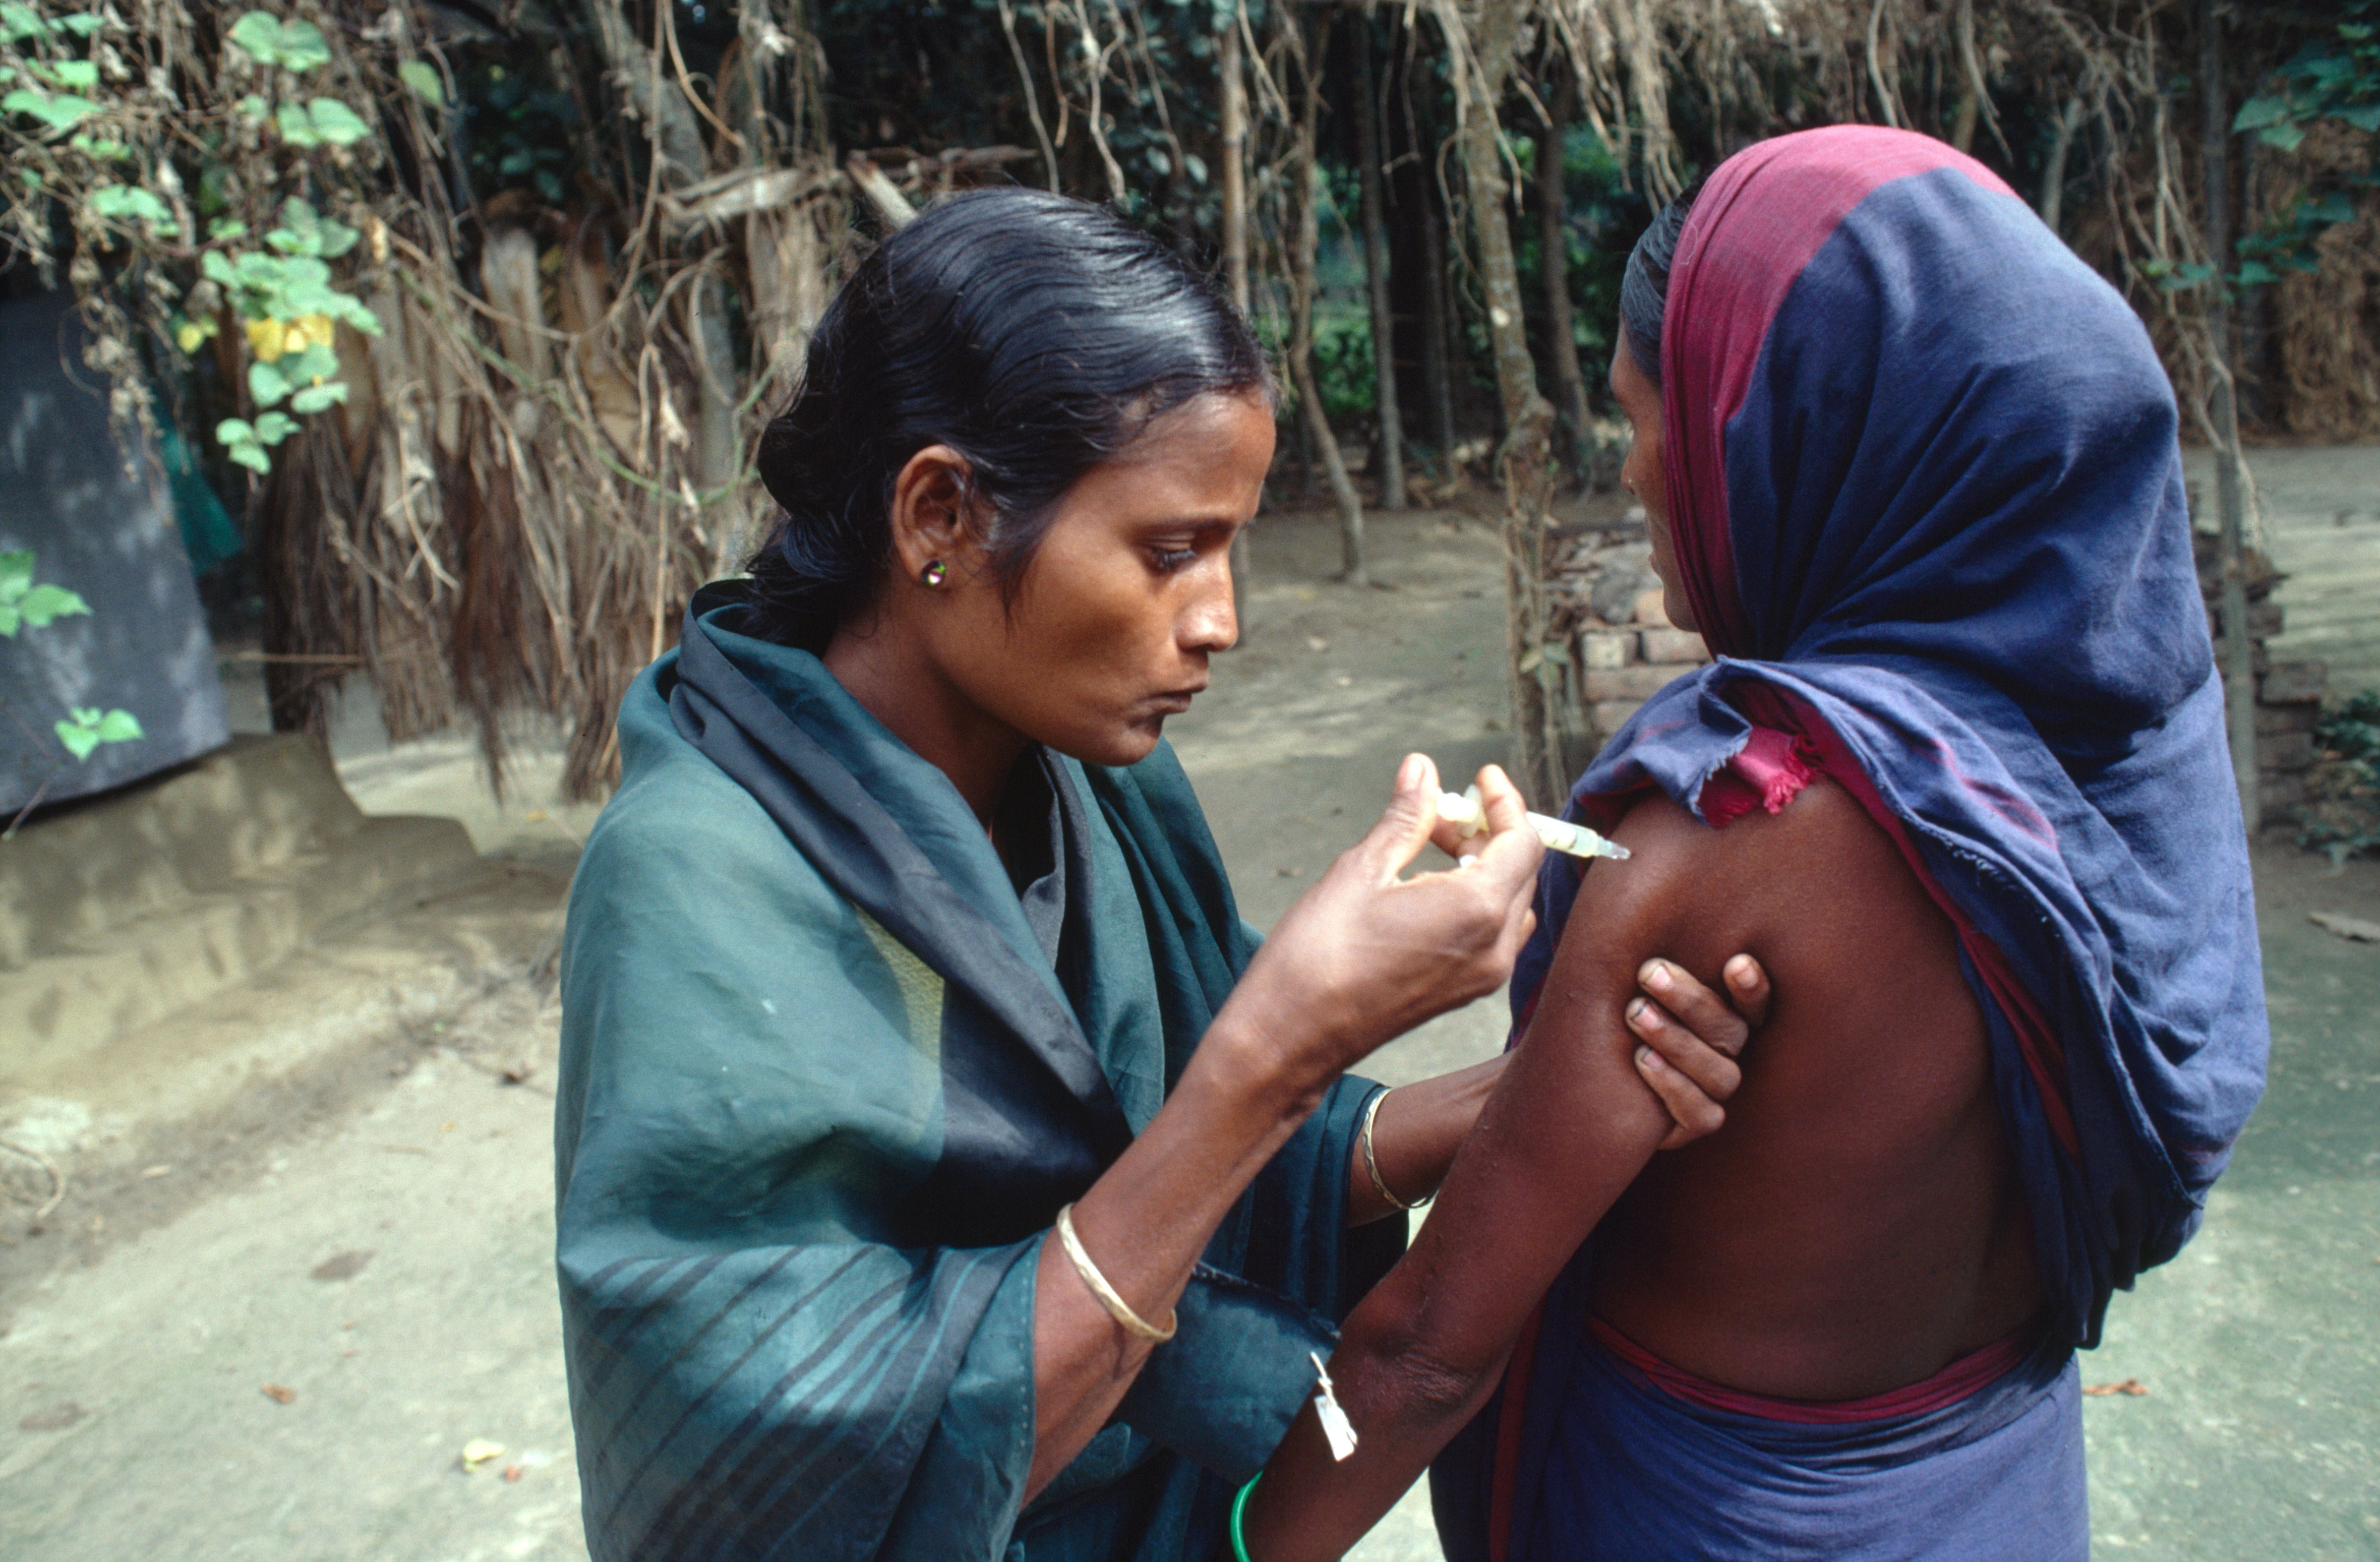 Family Planning, Bangladesh, Mobarakdi Village, Matlab District, Hashina Akhtar Giving A Three-Monthly Injection Of The Contraceptive Depro-Provera,